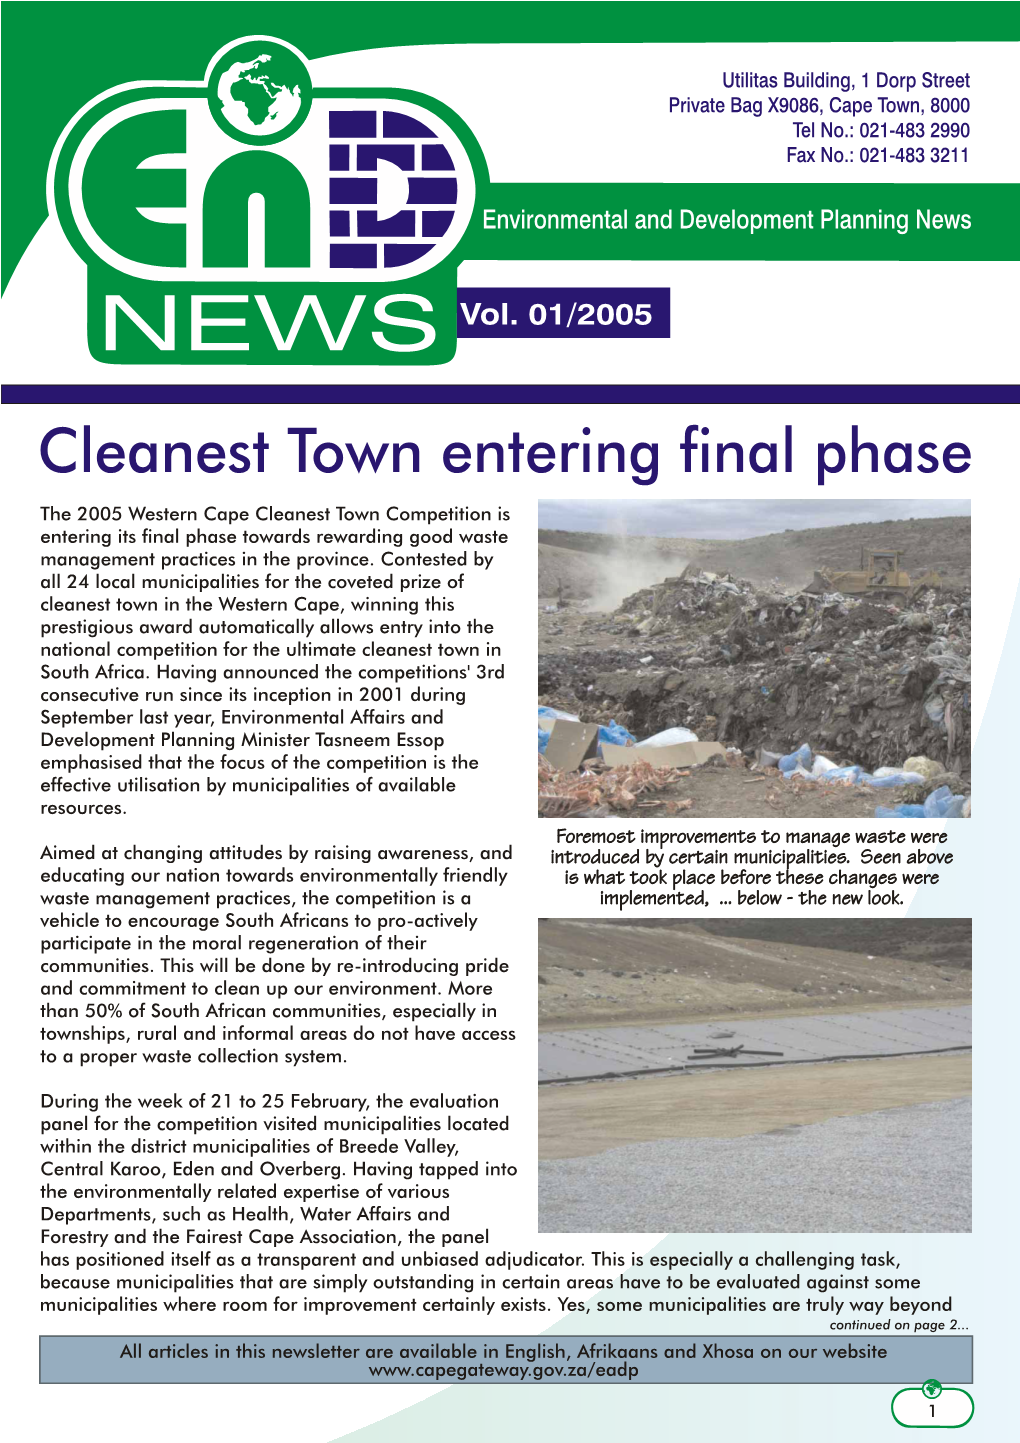 Cleanest Town Entering Final Phase